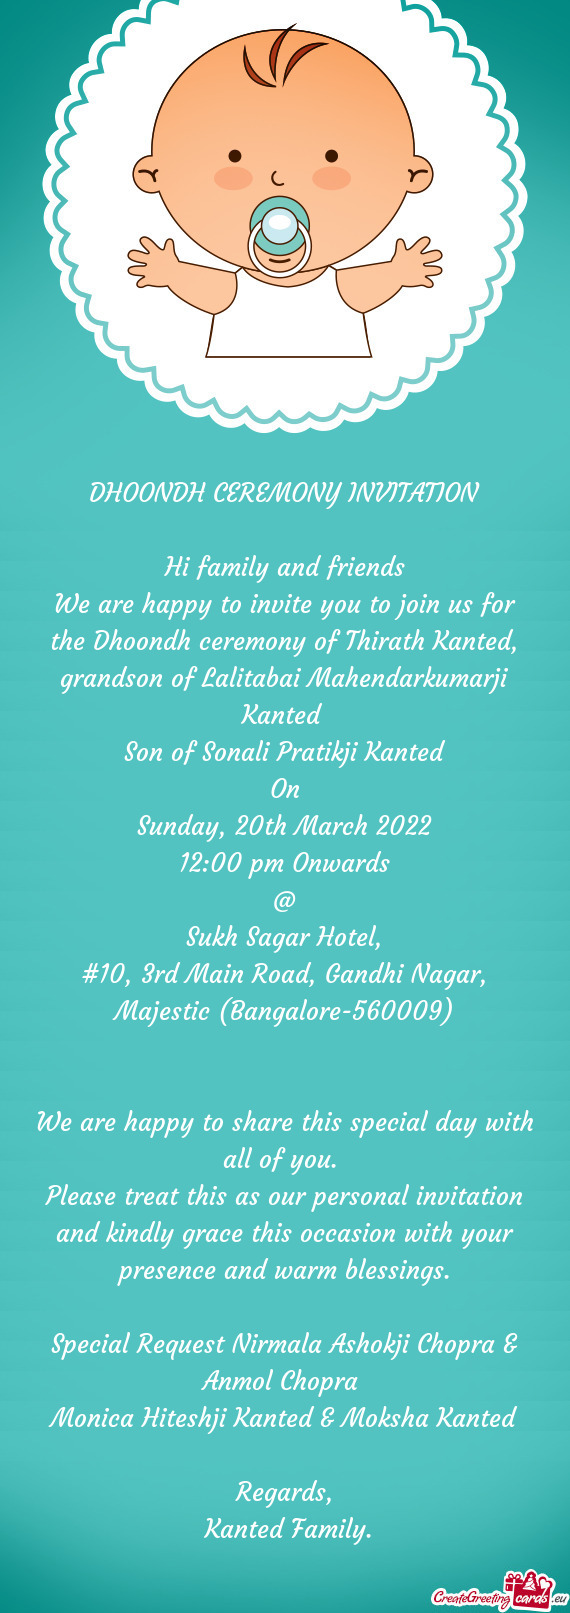 We are happy to invite you to join us for the Dhoondh ceremony of Thirath Kanted, grandson of Lalita